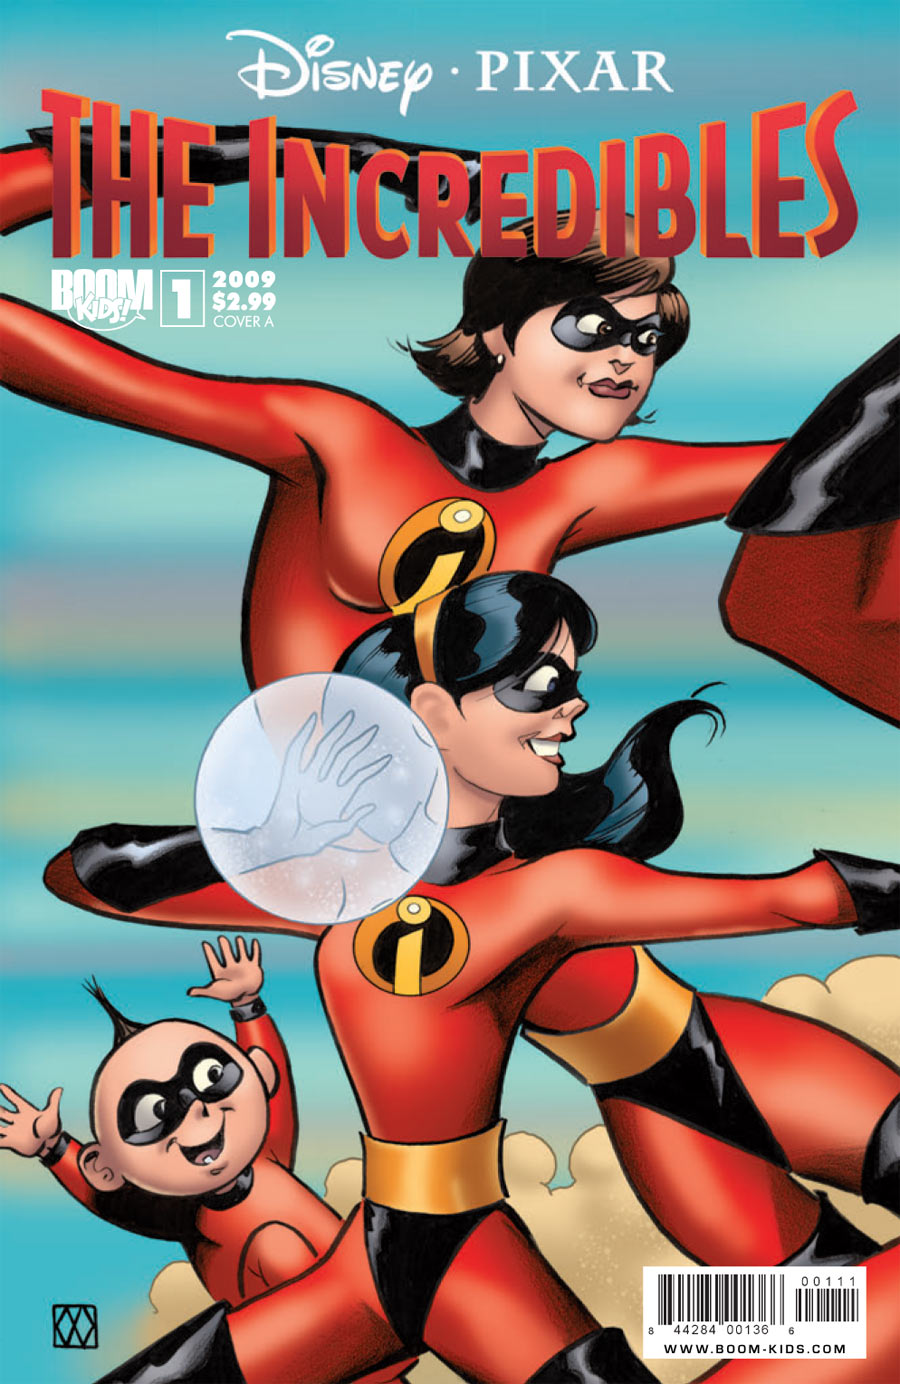 THE INCREDIBLES #1